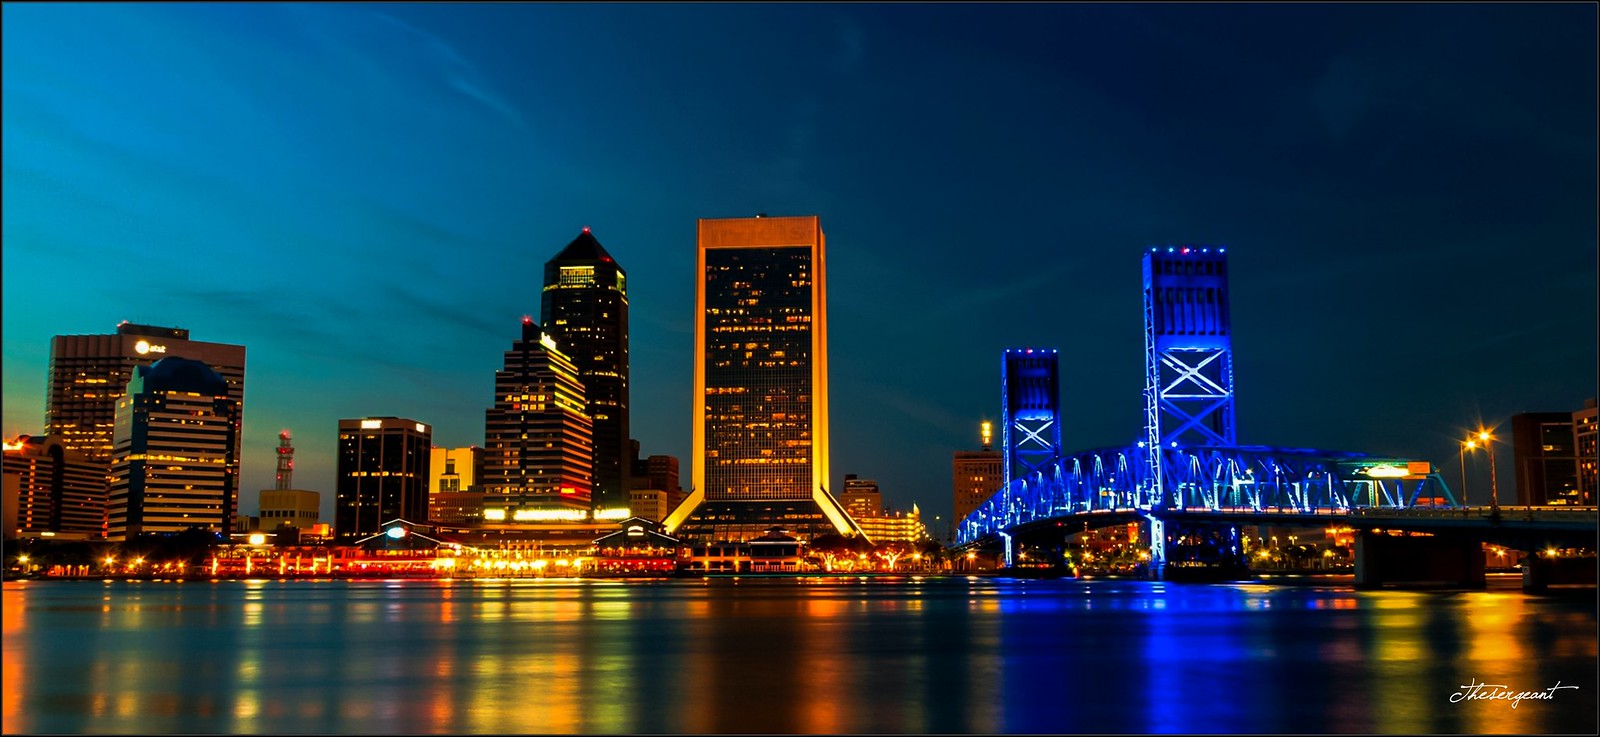 A beautiful night at Jacksonville.  (in explore) 😎